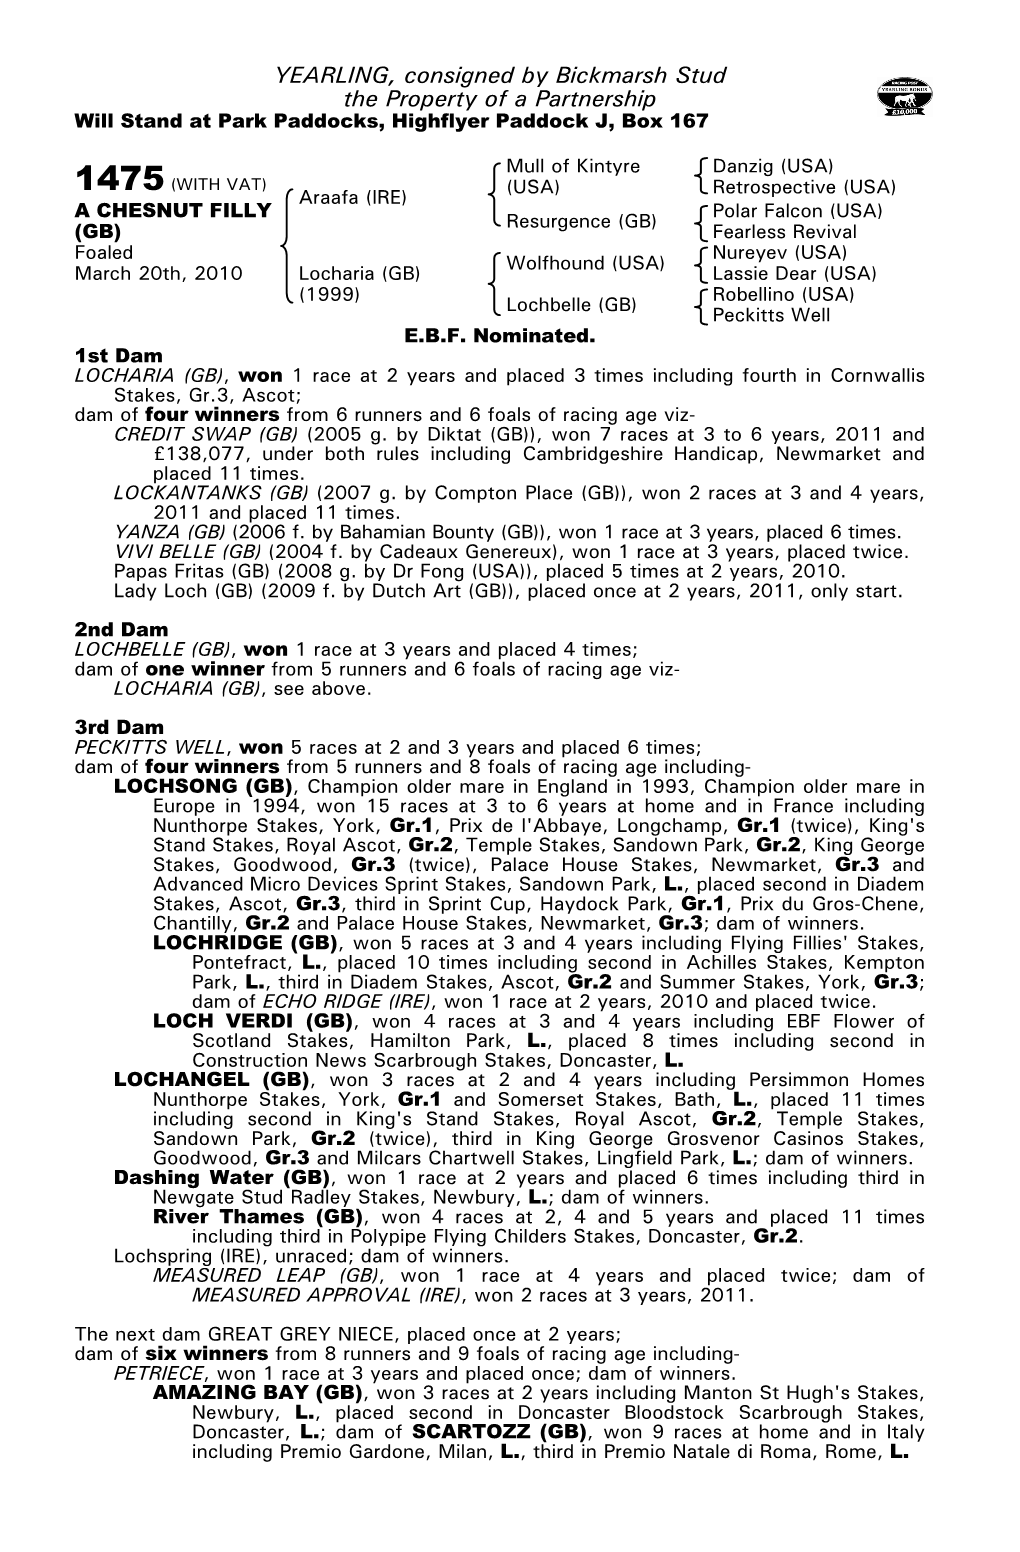 YEARLING, Consigned by Bickmarsh Stud the Property of a Partnership Will Stand at Park Paddocks, Highflyer Paddock J, Box 167